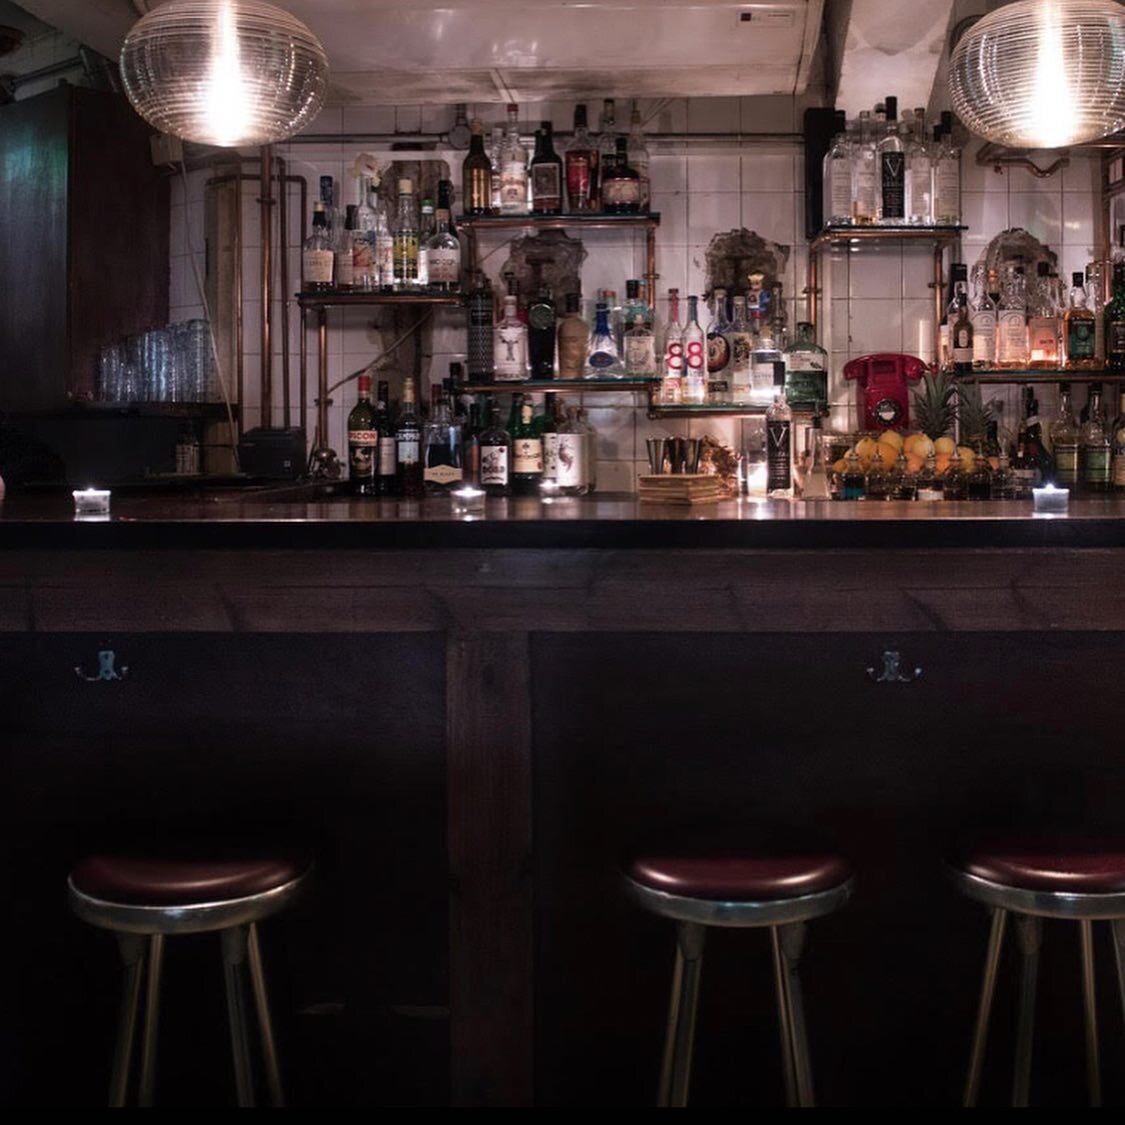 Take some underground toilets in London. Turn them into bars. Throw in a still. Welcome to Ladies snd Gents, the five star dive bar! 
.
.
.

#mixology #cocktailbar #drinkstagram #instagood #mixologist #readytodrink#bartenderlife #mixologist #bar#mixo